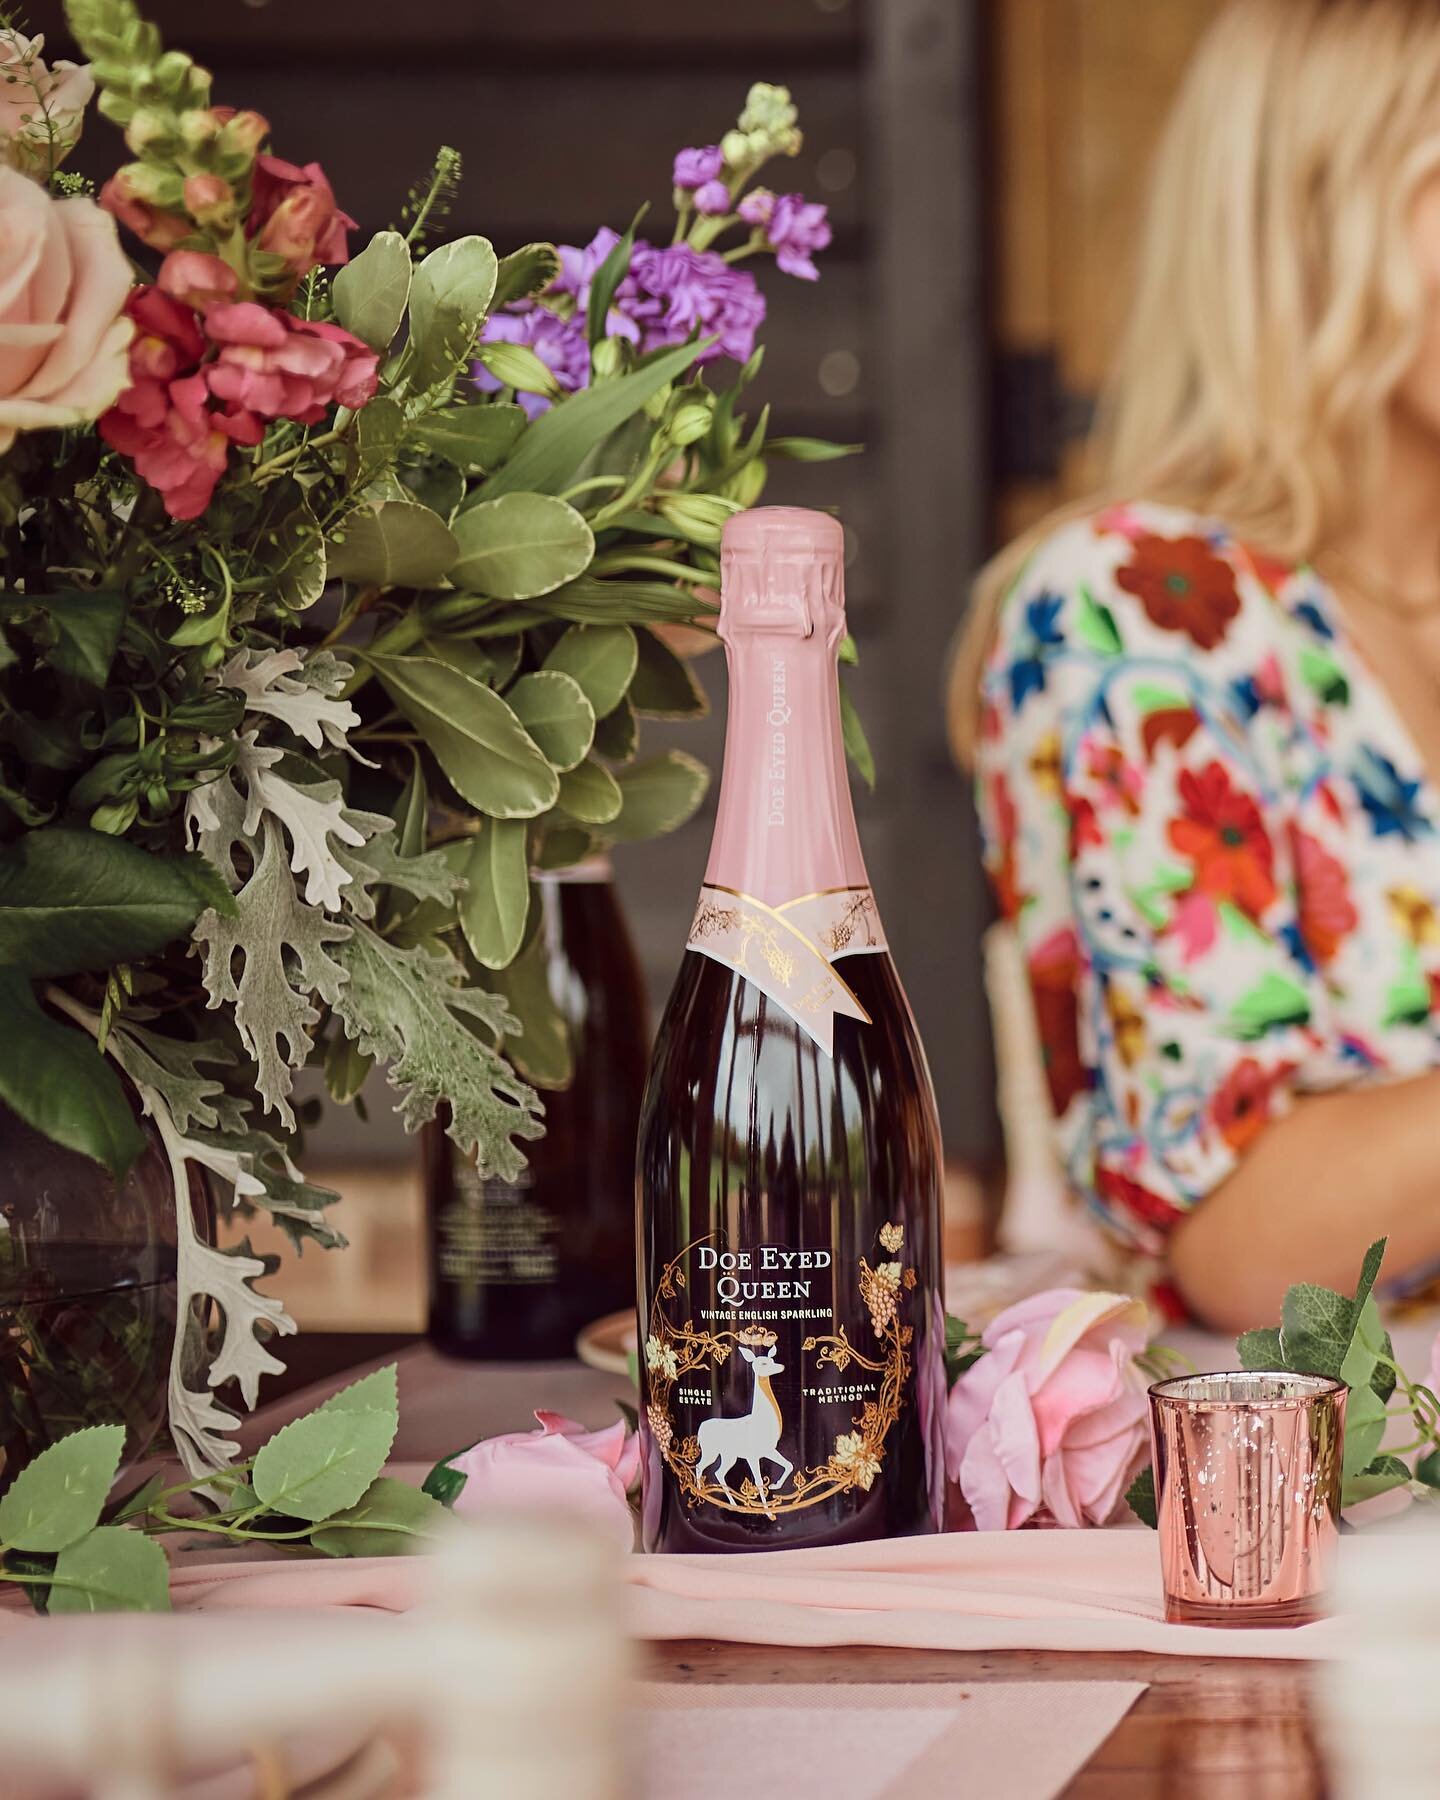 We can&rsquo;t wait for a summer filled with English sparkling ros&eacute; ahead 🥂✨

#englishwine #sparklingwine #ros&eacute; #summer #wine #celebrations #winelover #vineyard #winery